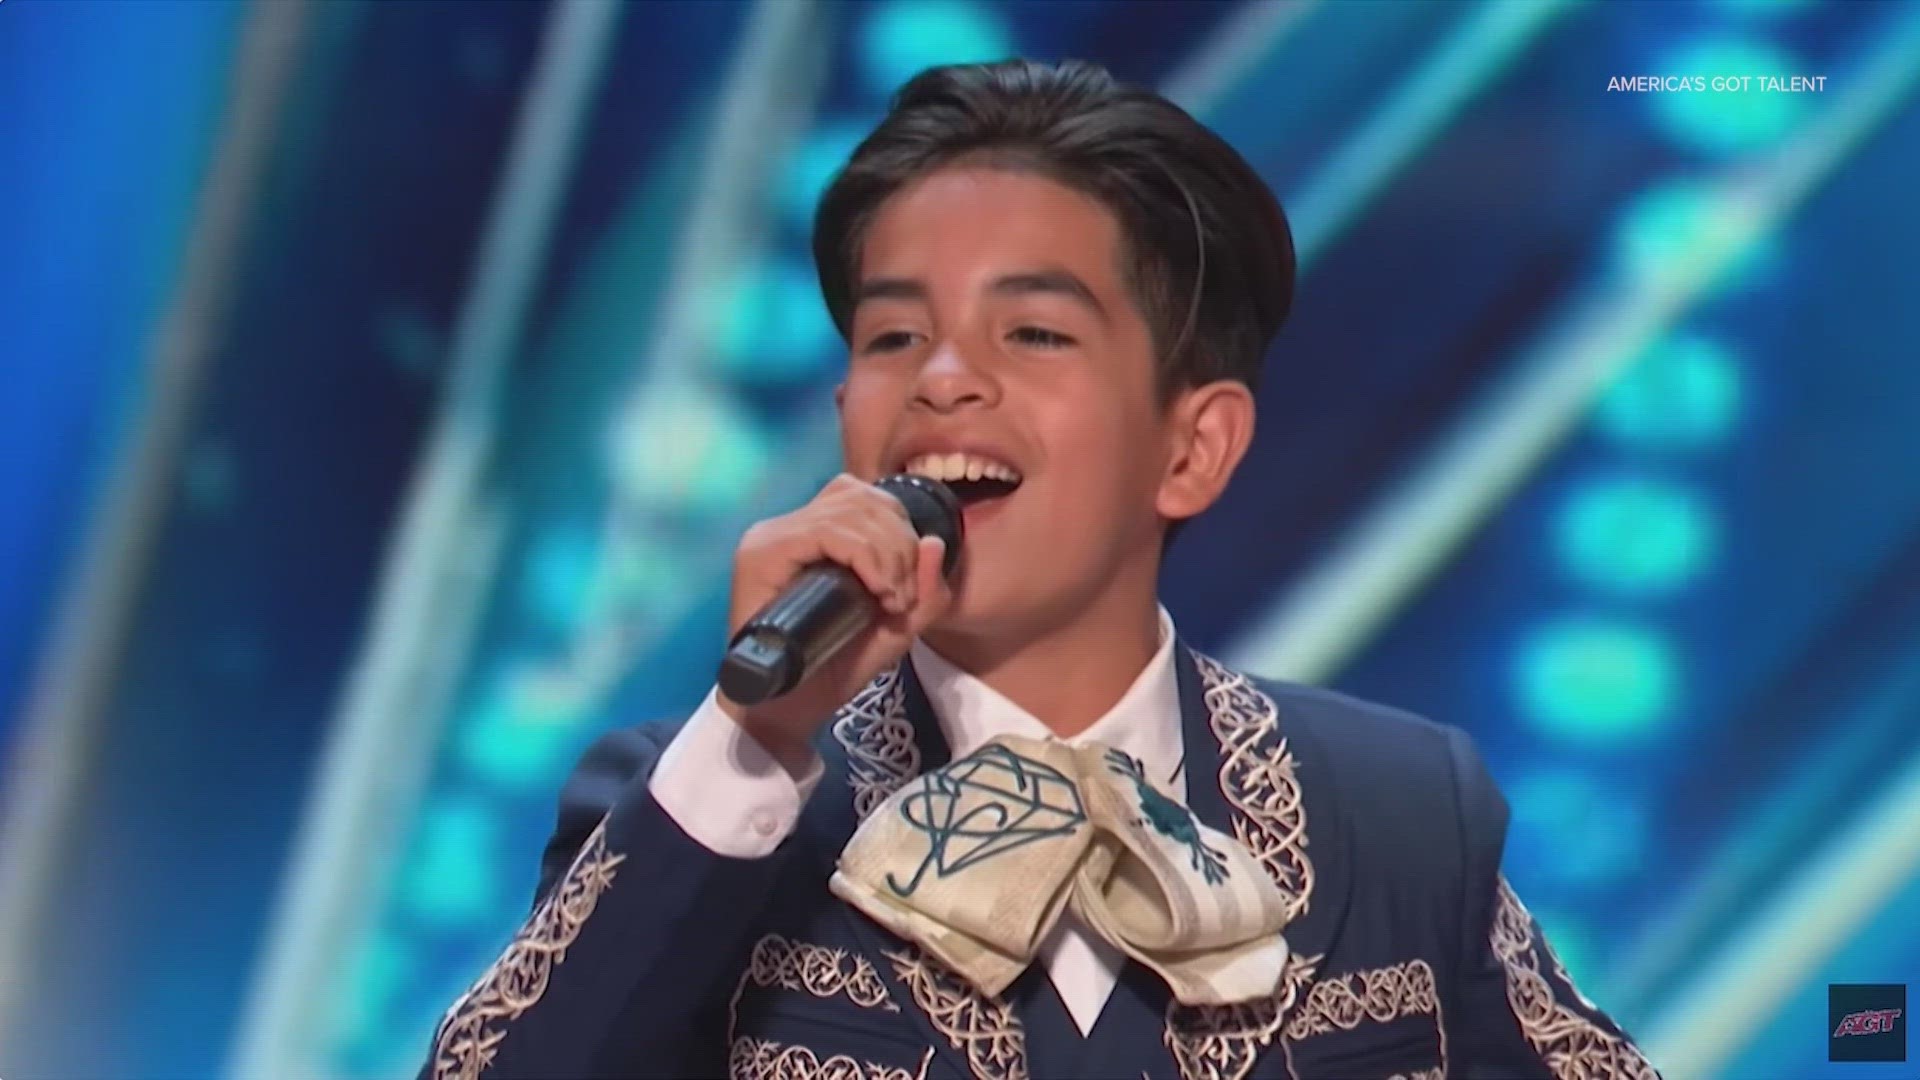 Eduardo Antonio Treviño has been wowing the whole country with his appearances on "America's Got Talent."